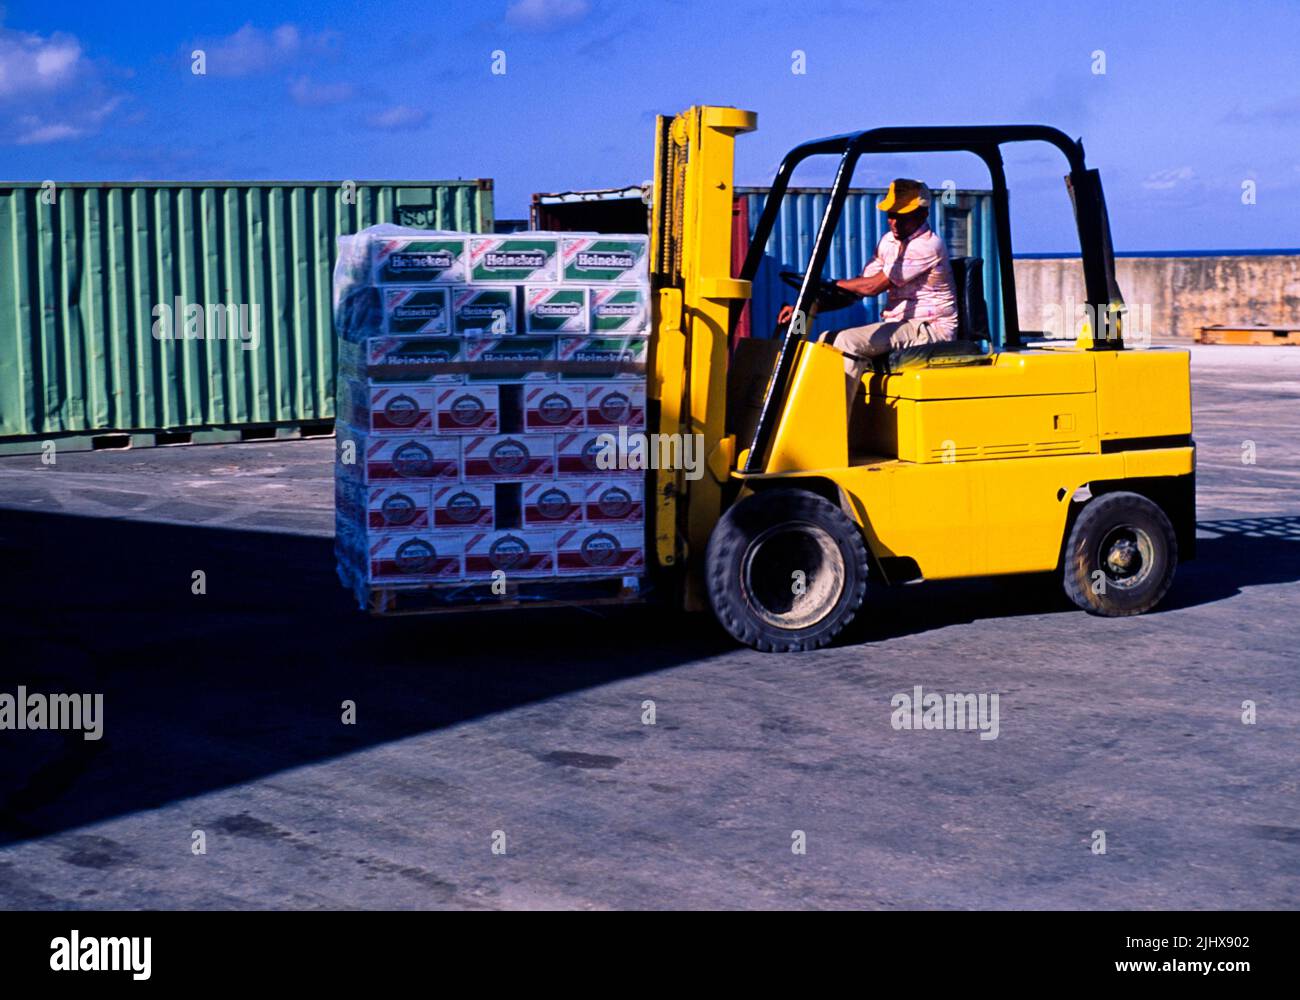 Forklift truck carrying boxes of beer at The Dock quayside, Cayman Brac, Cayman Islands, West Indies c 1990 Stock Photo